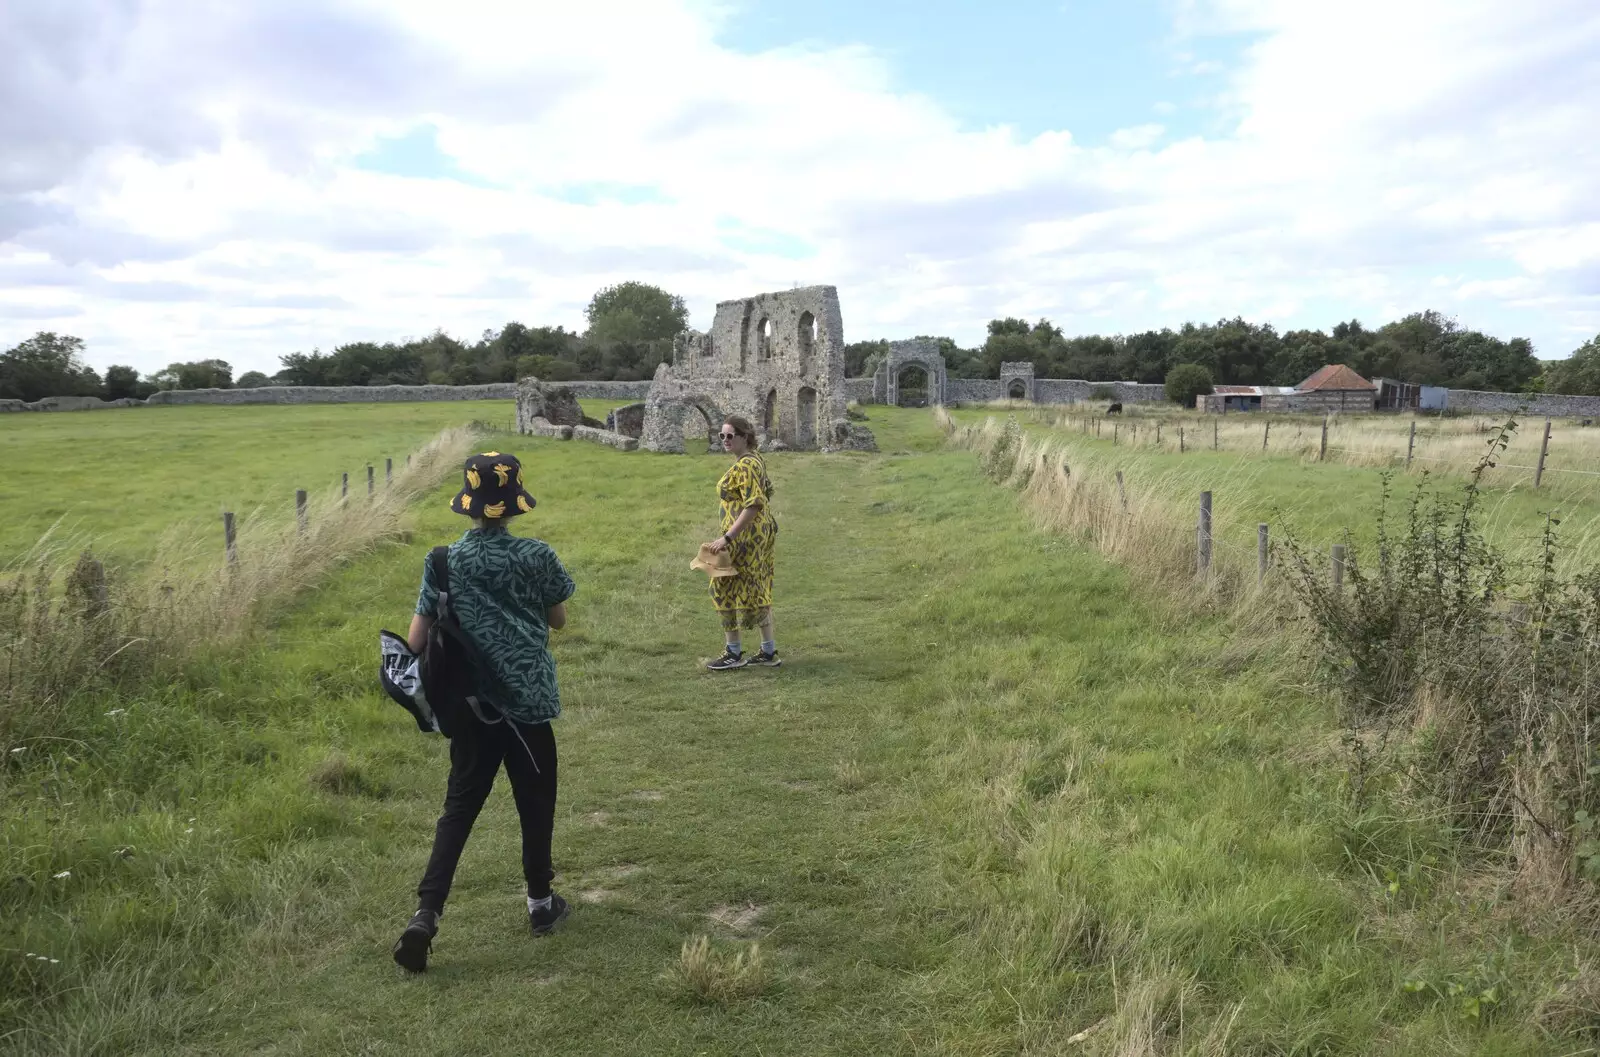 Harry and Isobel near the ruins of Greyfriars, from A Cambridge Reunion on the Beach, Dunwich, Suffolk - 23rd August 2023